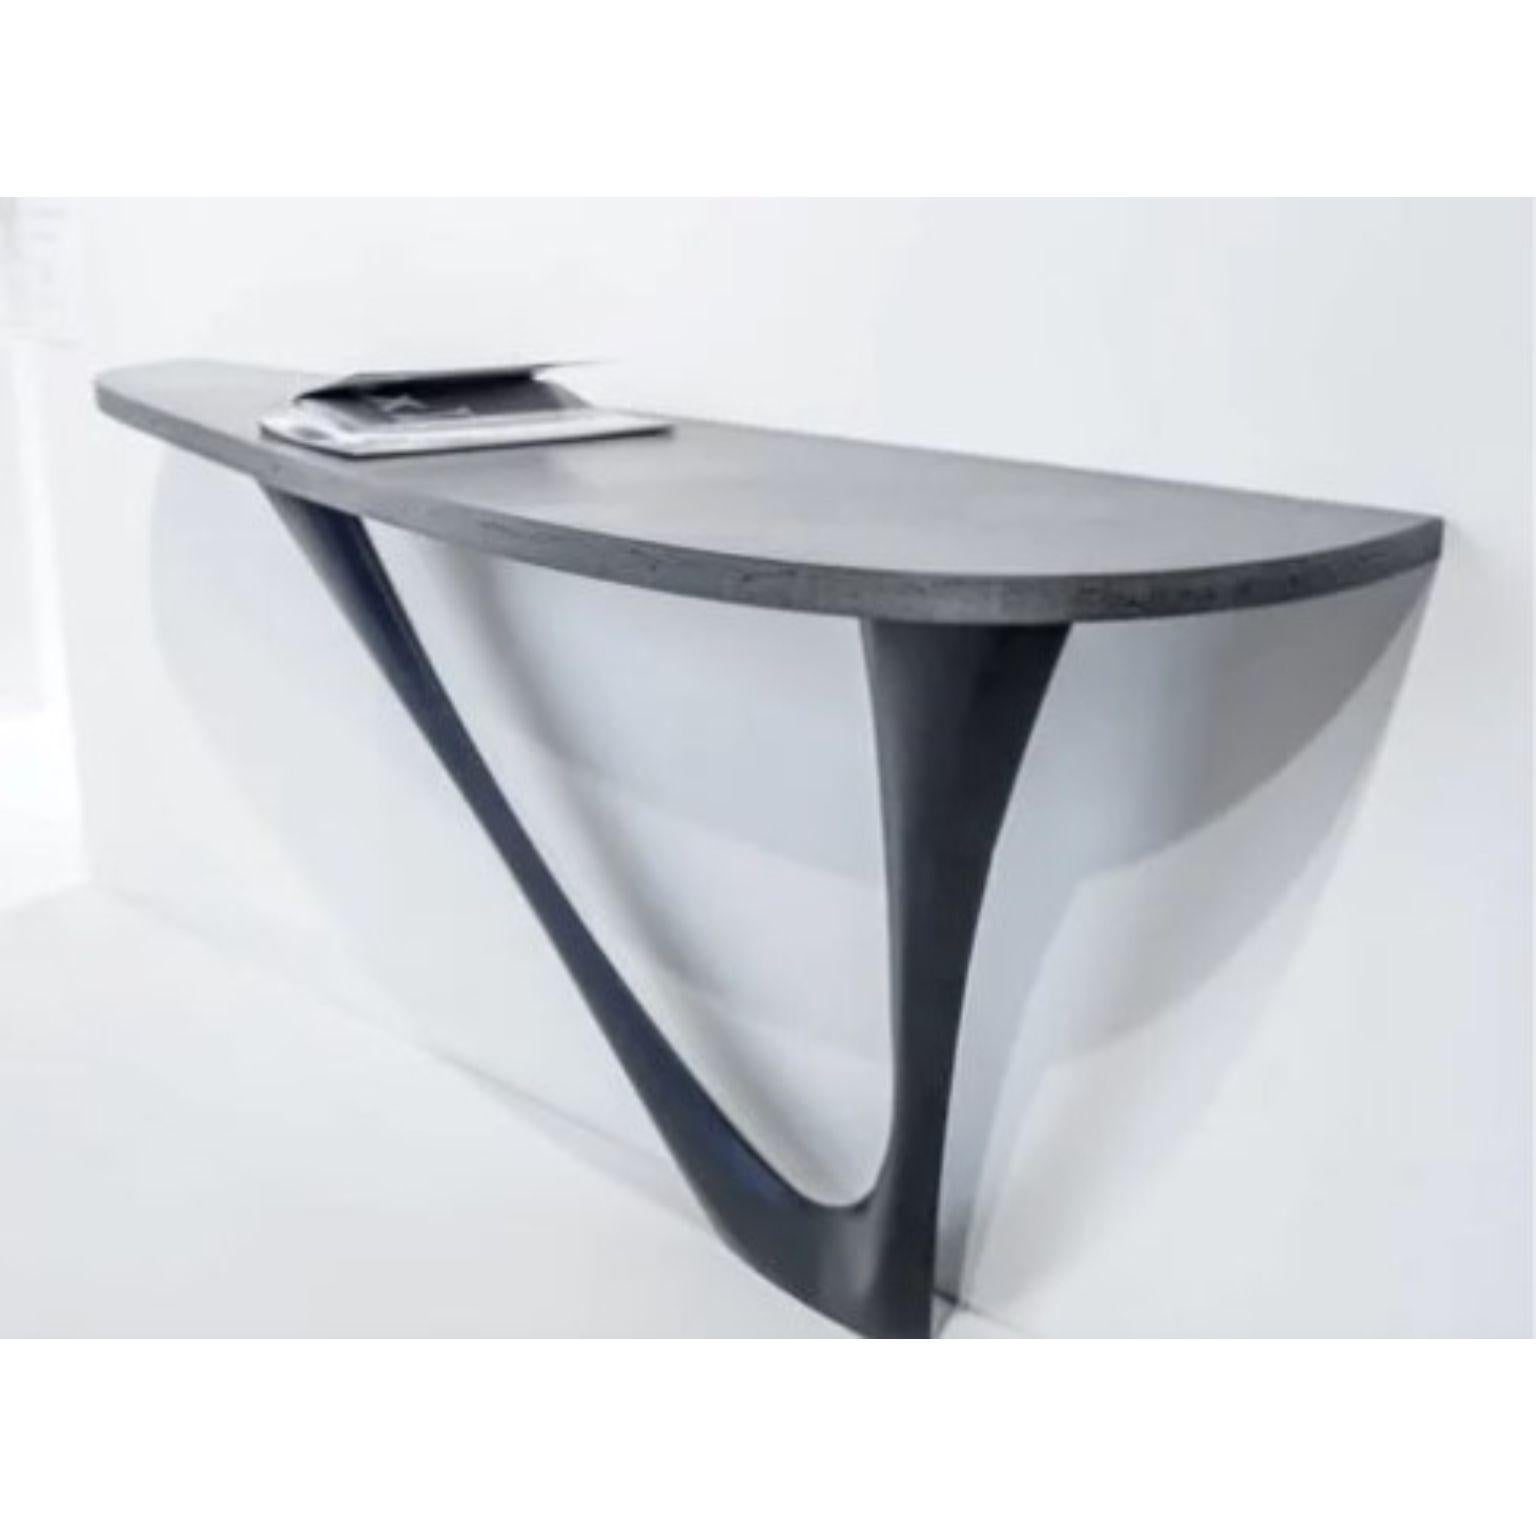 Graphite G-Console Steel Base with Steel Top Mono by Zieta For Sale 2